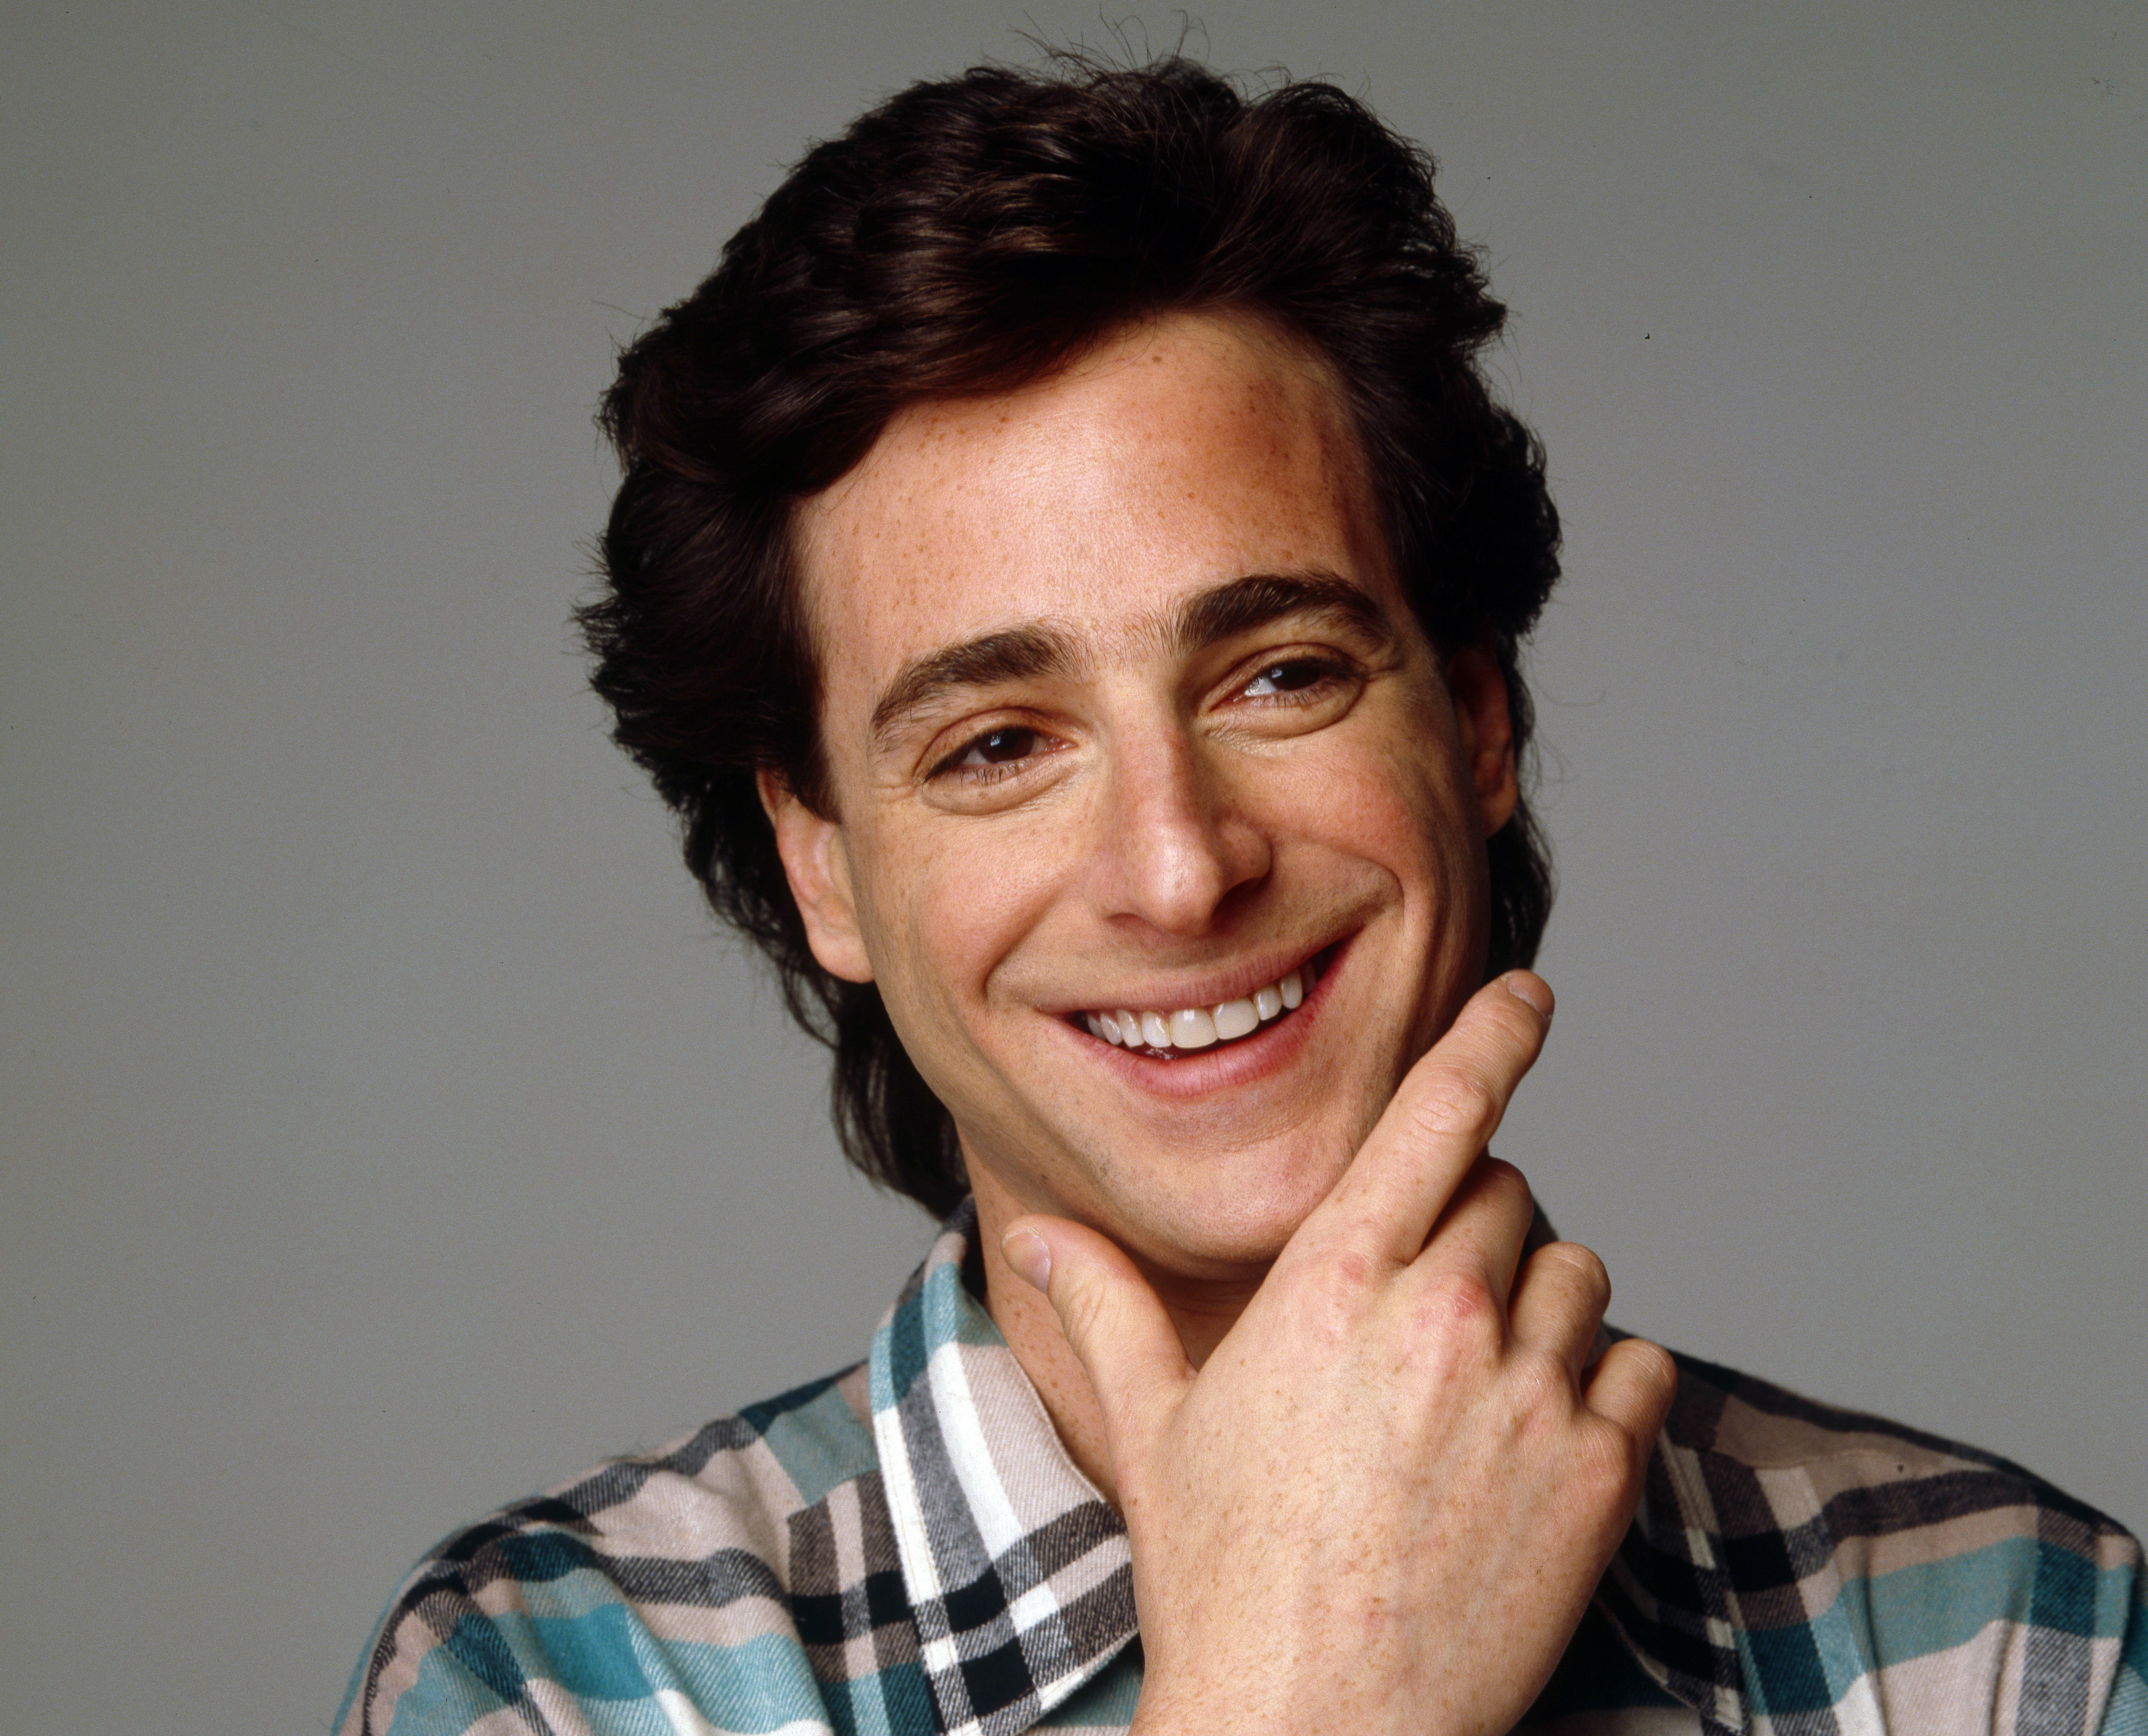 Bob Saget poses for a promotional photo in 1993 for the ABC Television series "Full House." | Source: Getty Images